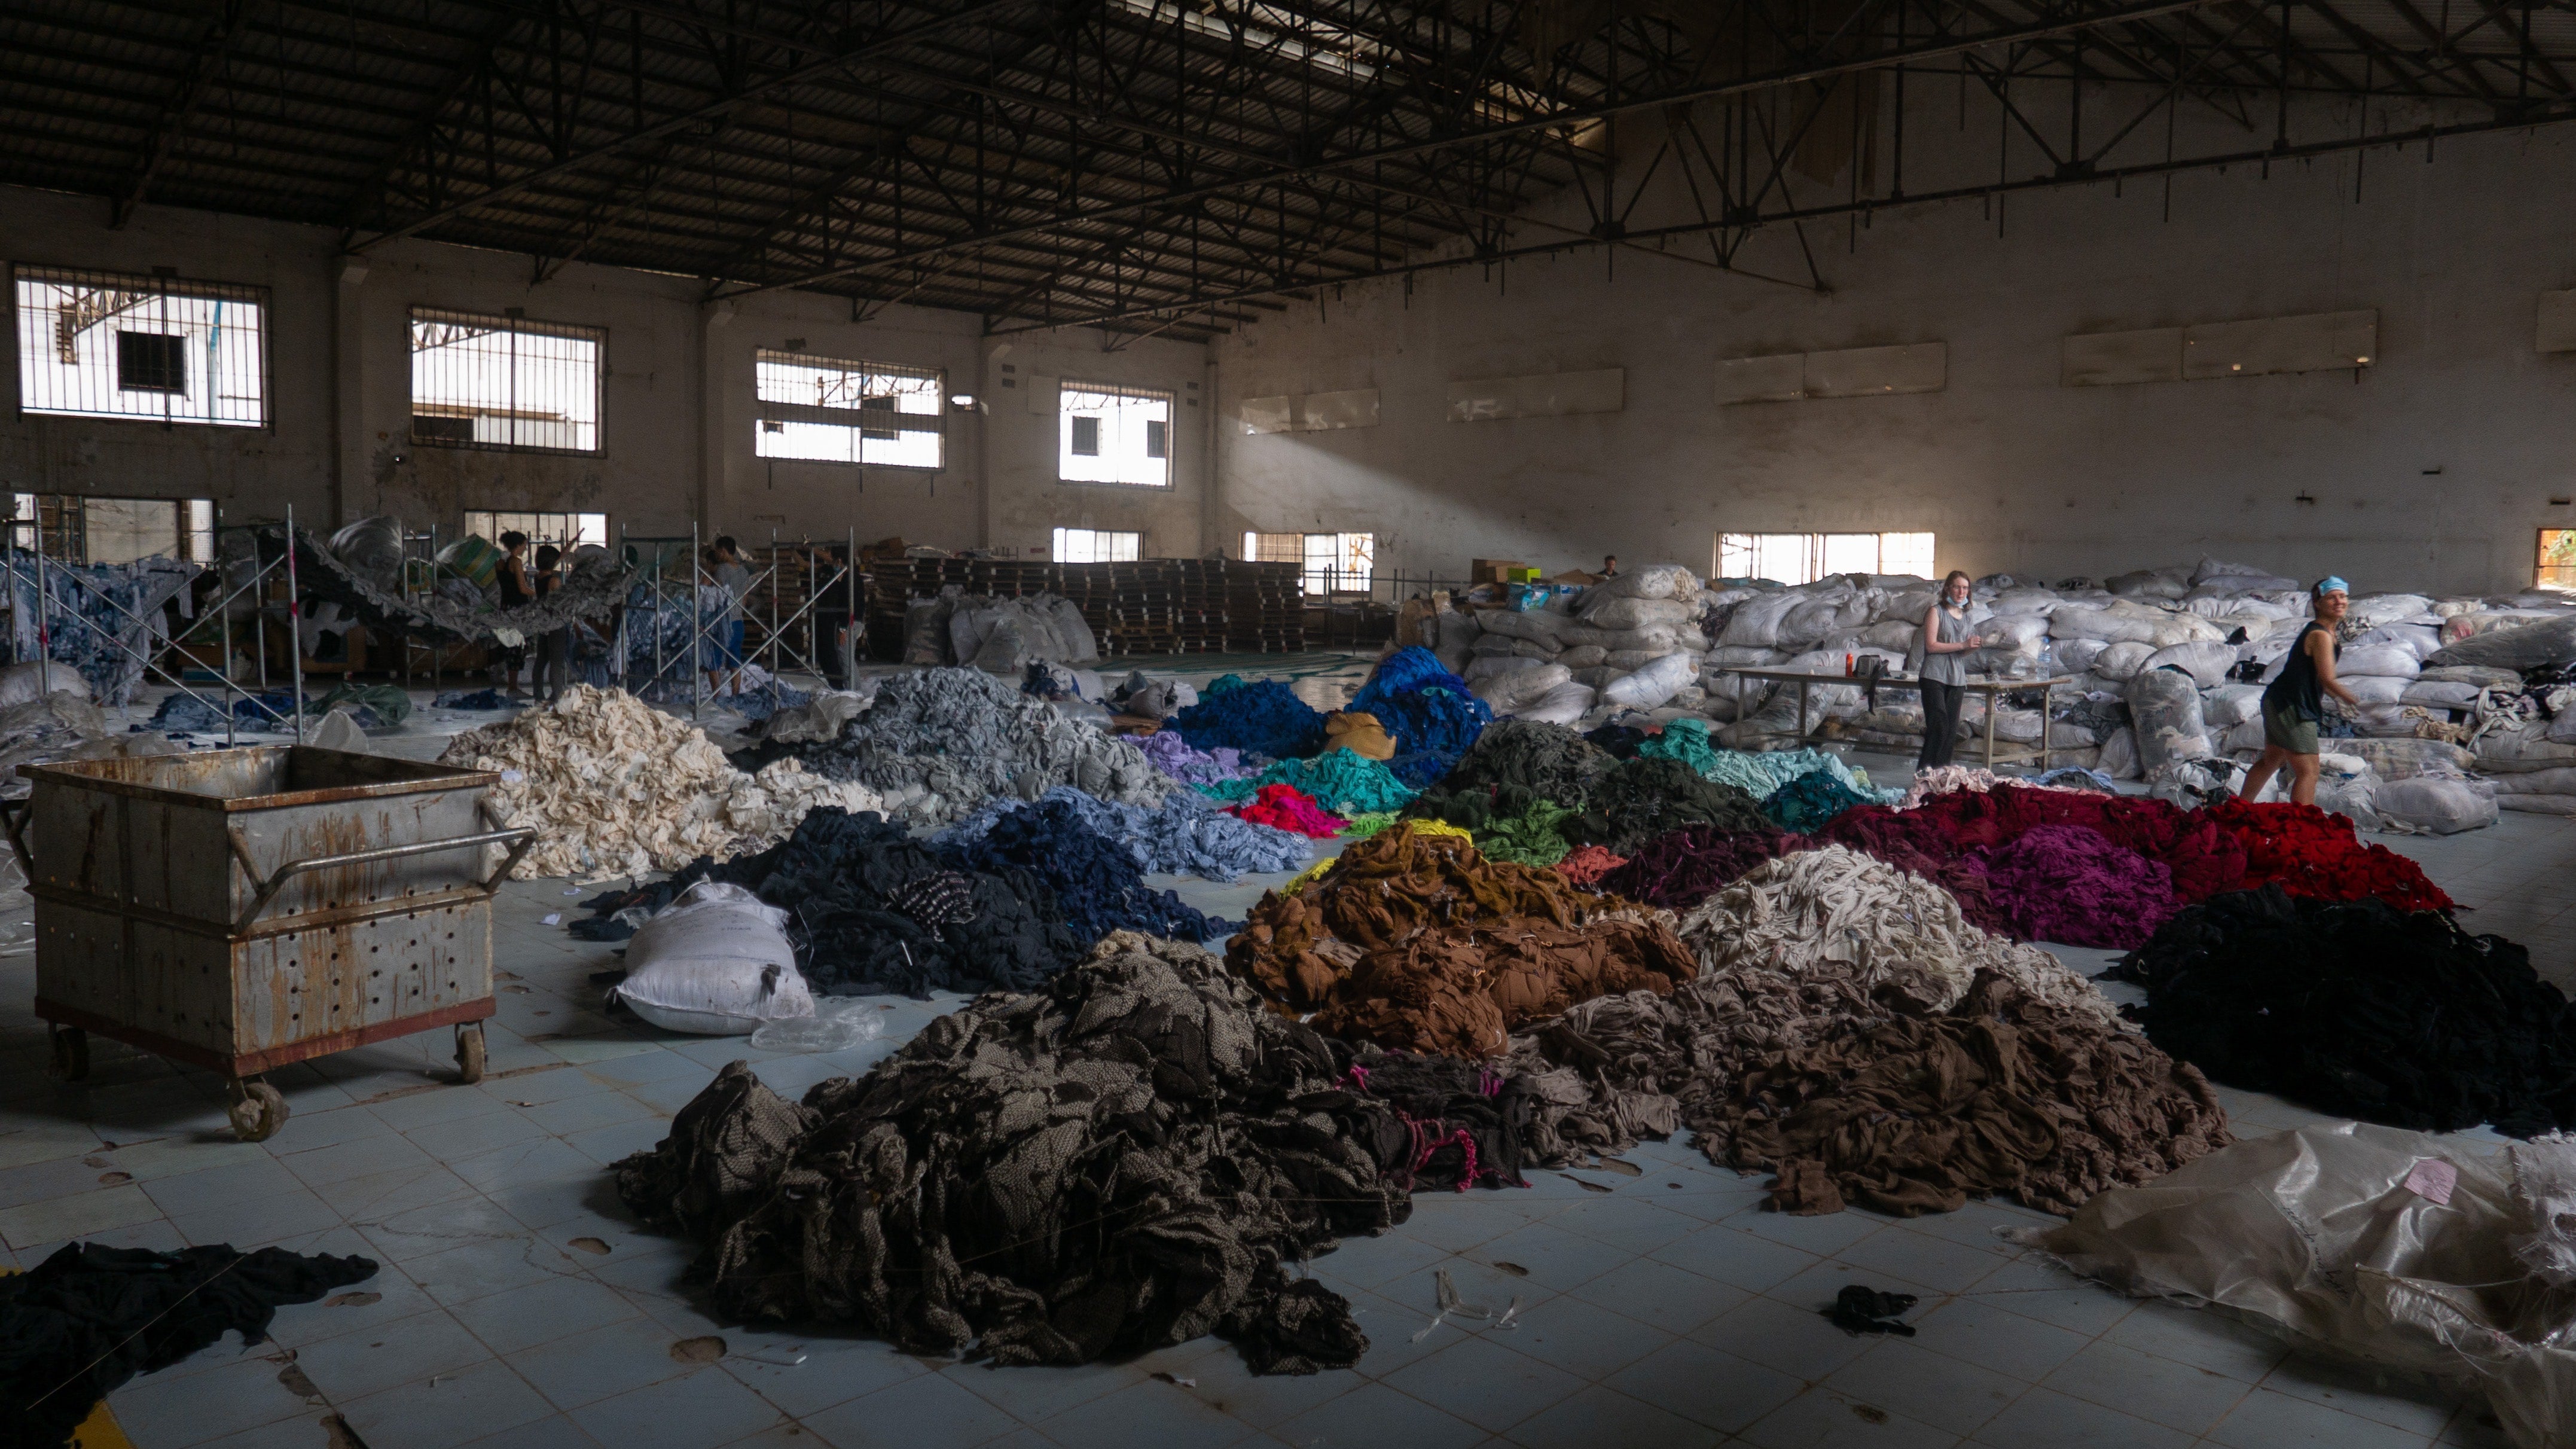 SOCIAL AND ENVIRONMENTAL IMPACTS OF FAST FASHION